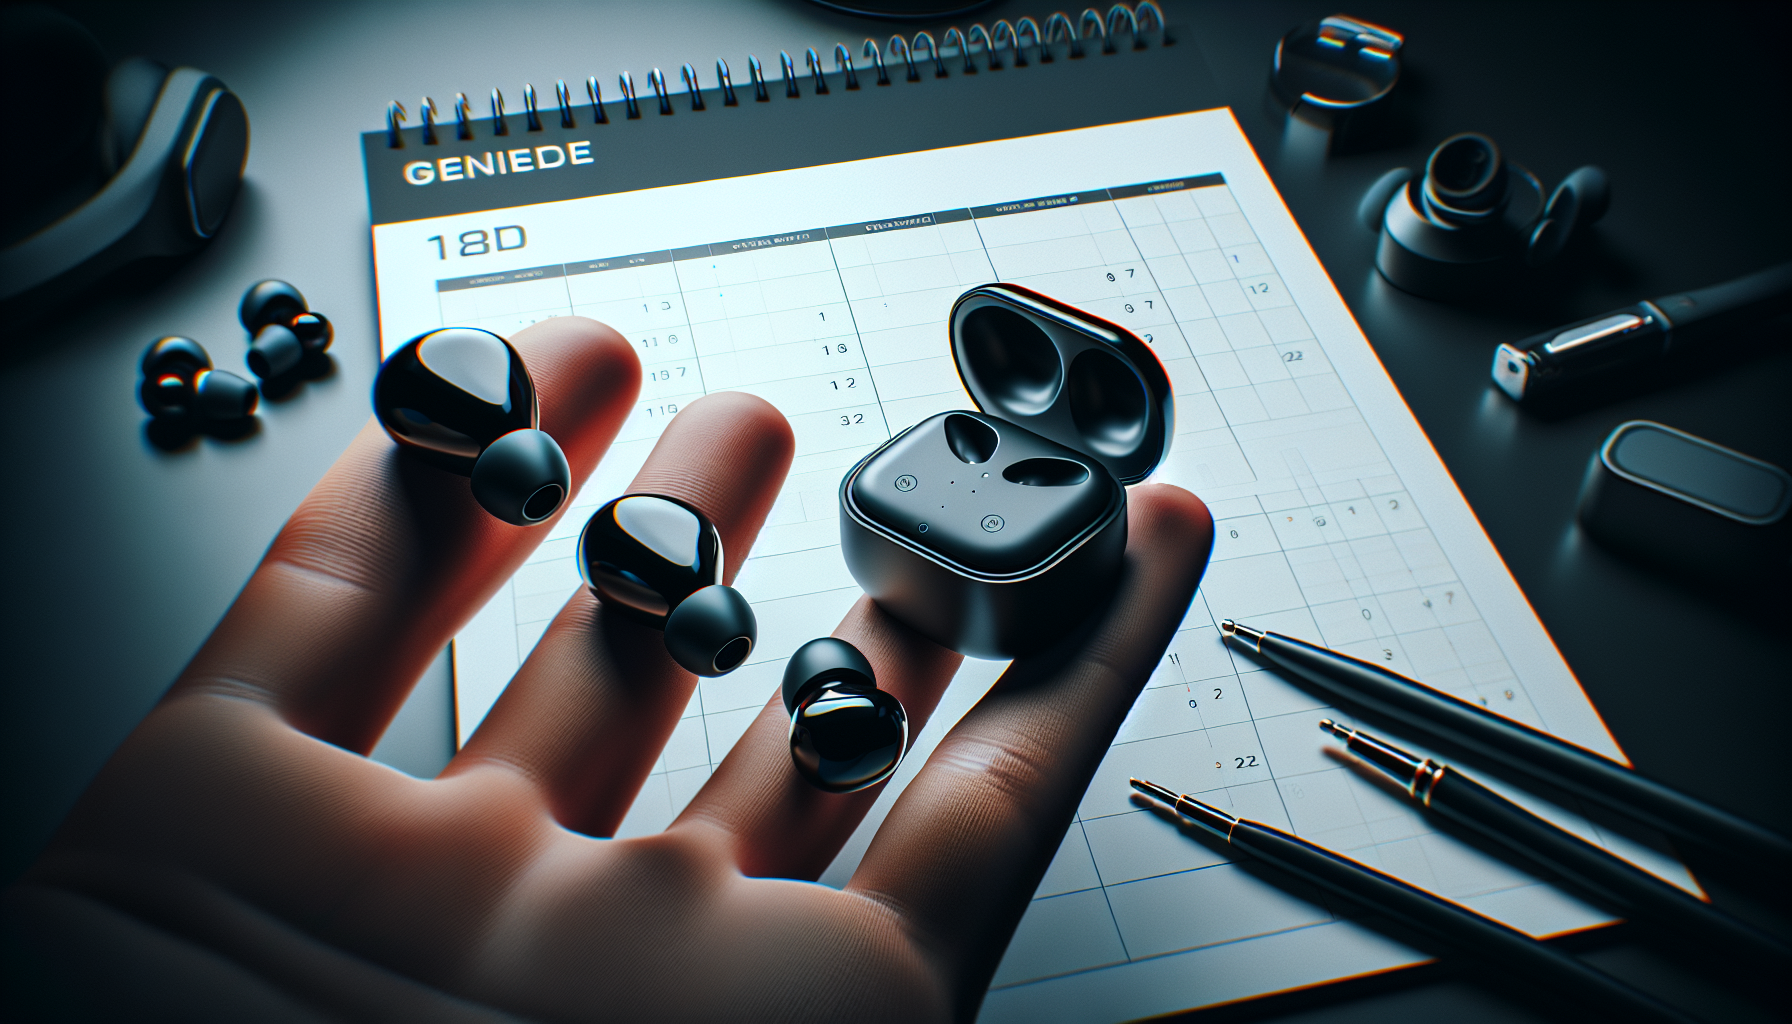 Potential Release of Two New AirPods 4 Models Later This Year